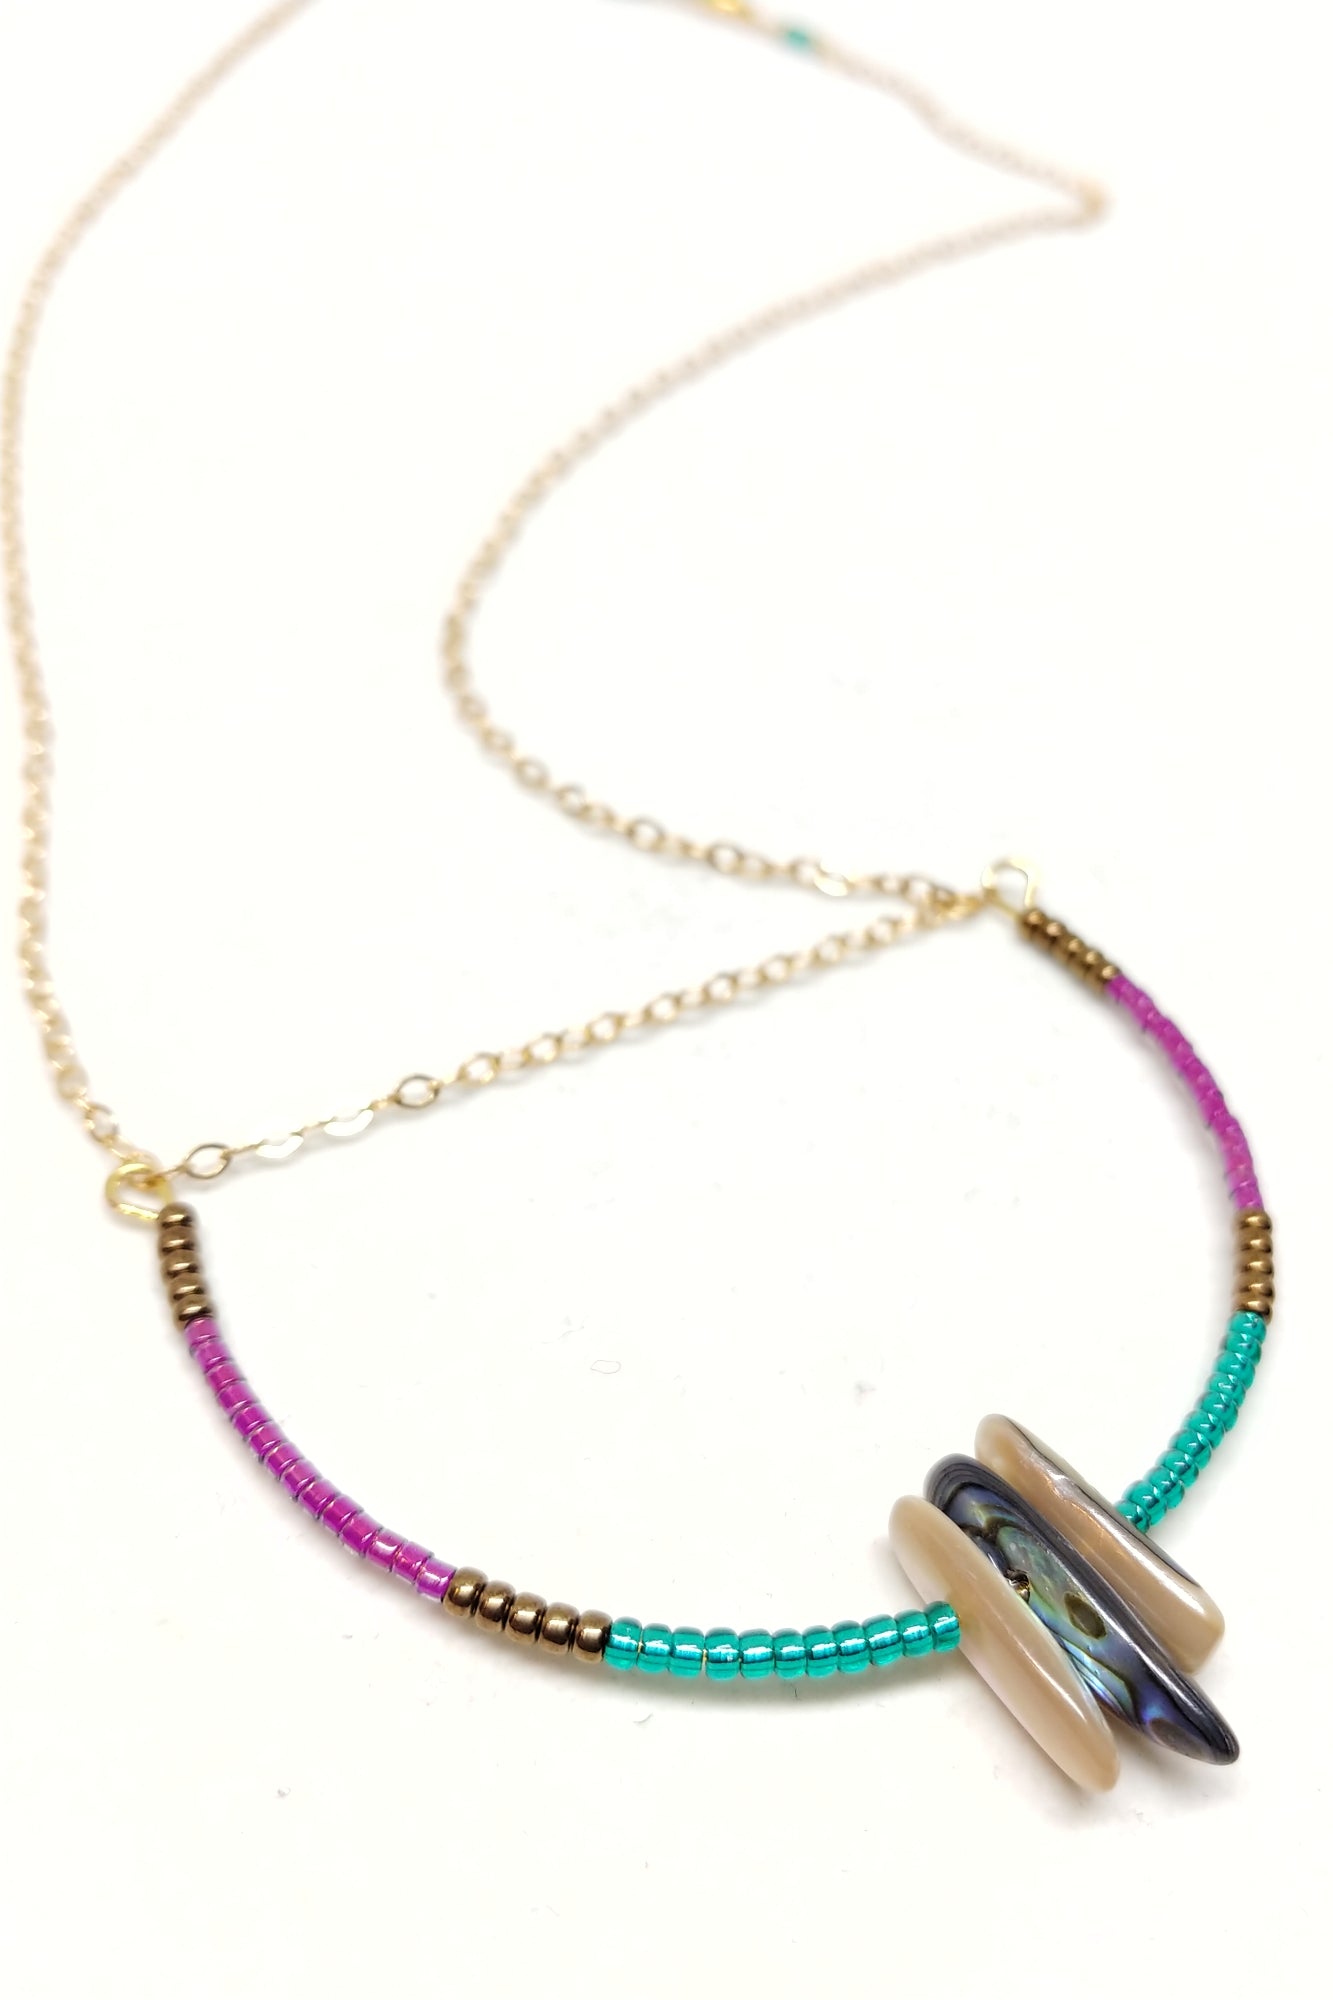 gold-plated necklace, delicate chain, U-shaped pendant with colorful seed beads and abalone.